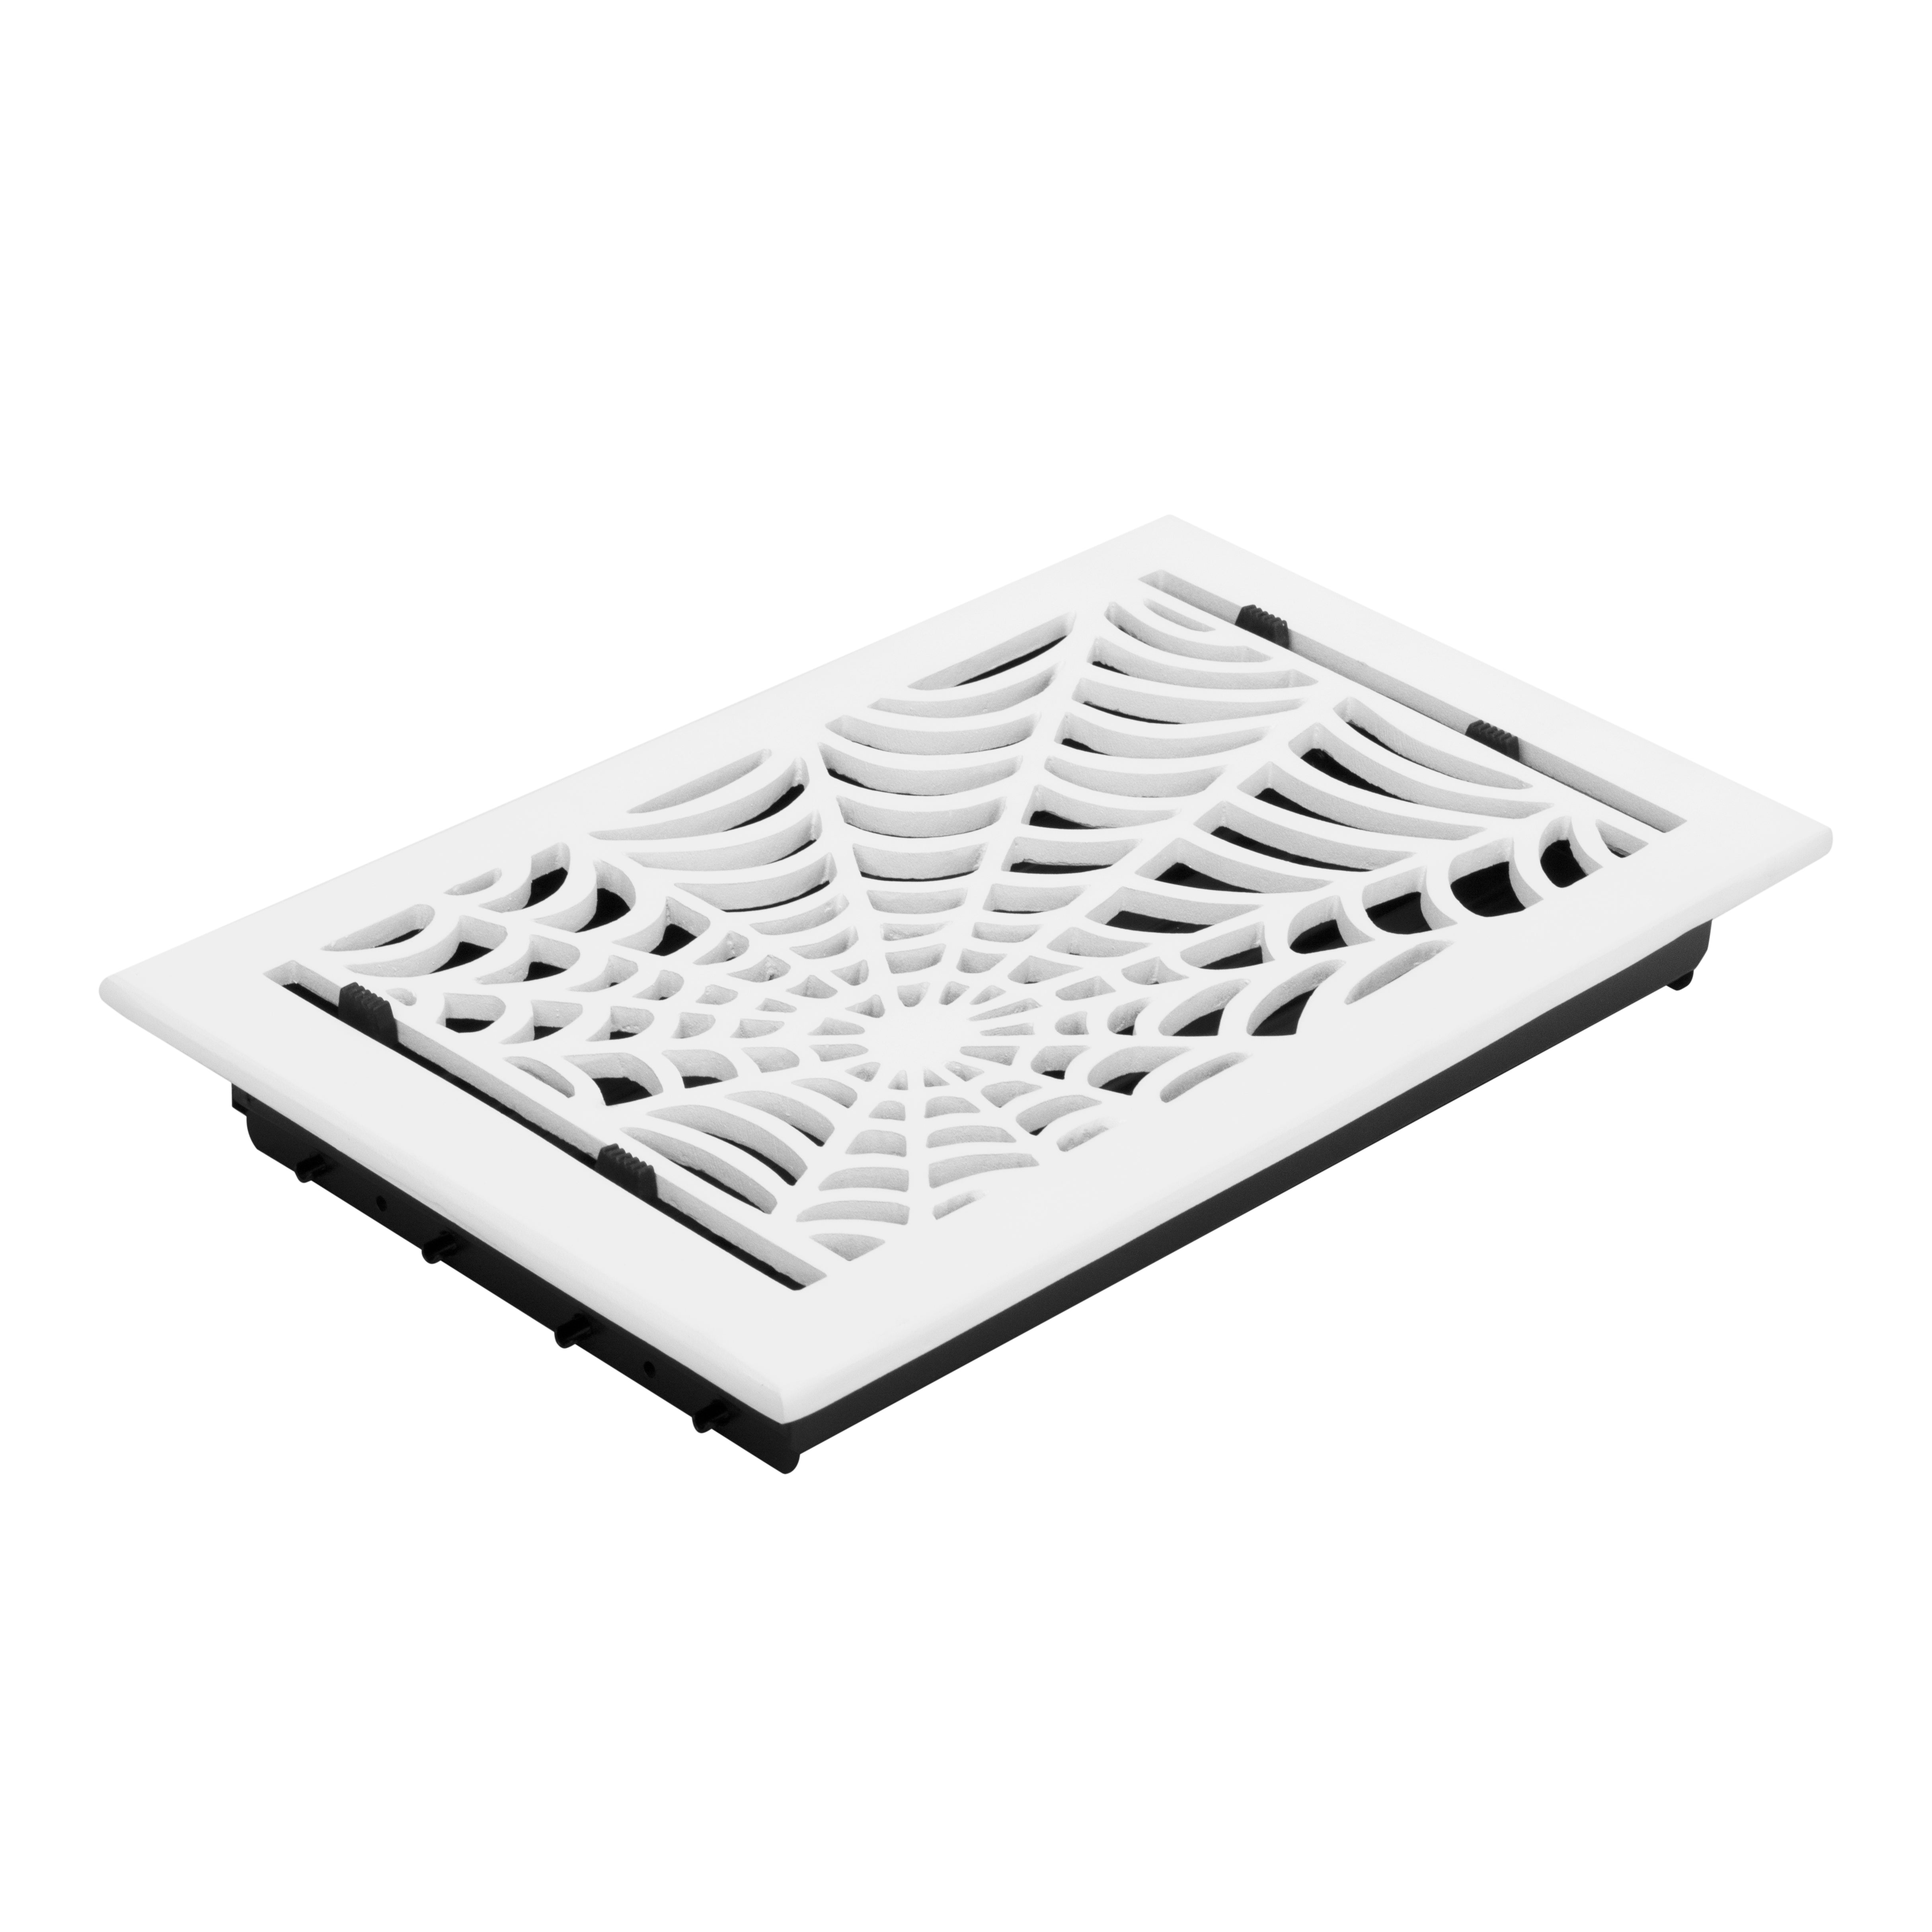 Spooky Gothic Vent cover 8"x 12" Duct Opening (Overall 9-1/2"x 13-3/4") in Spider Web Design | Solid Cast Aluminium Register Cover | Powder Coated